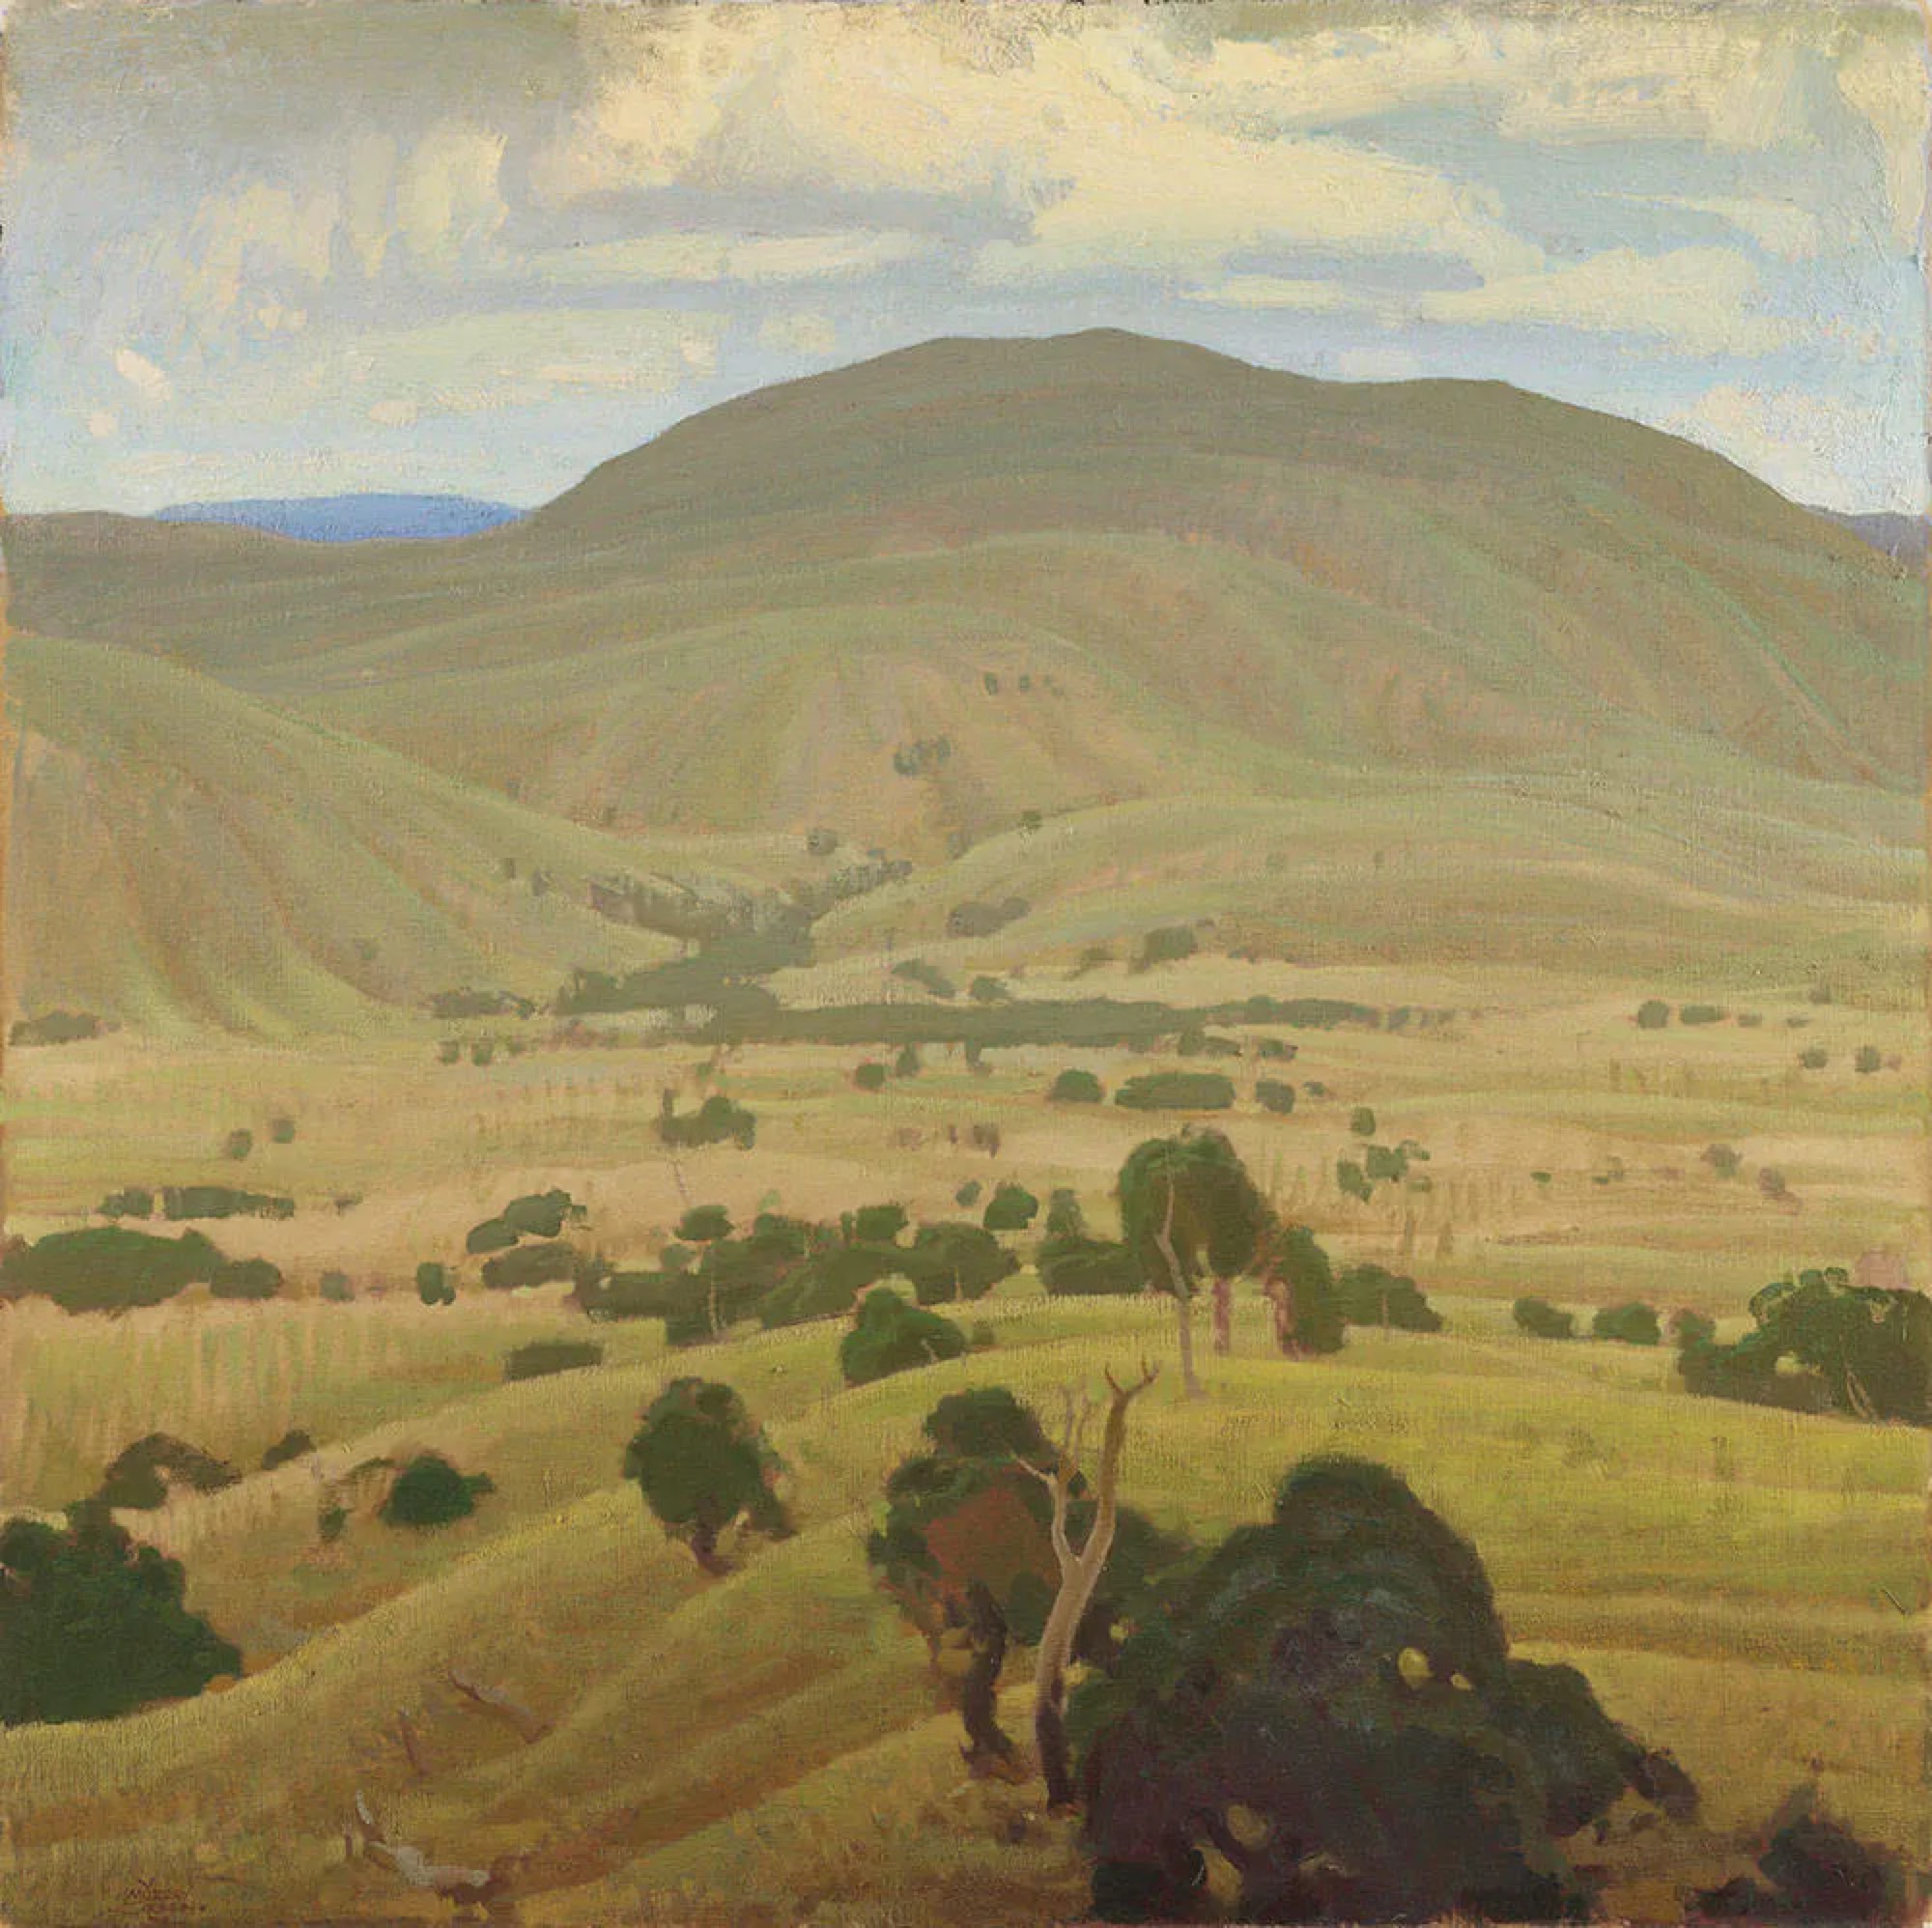 Murray Griffin, <em>Golden barriers</em>, 1934, oil on canvas, 91.8 x 92.0 cm, Art Gallery of Ballarat. Winner of the George Crouch Memorial Prize, 1935.